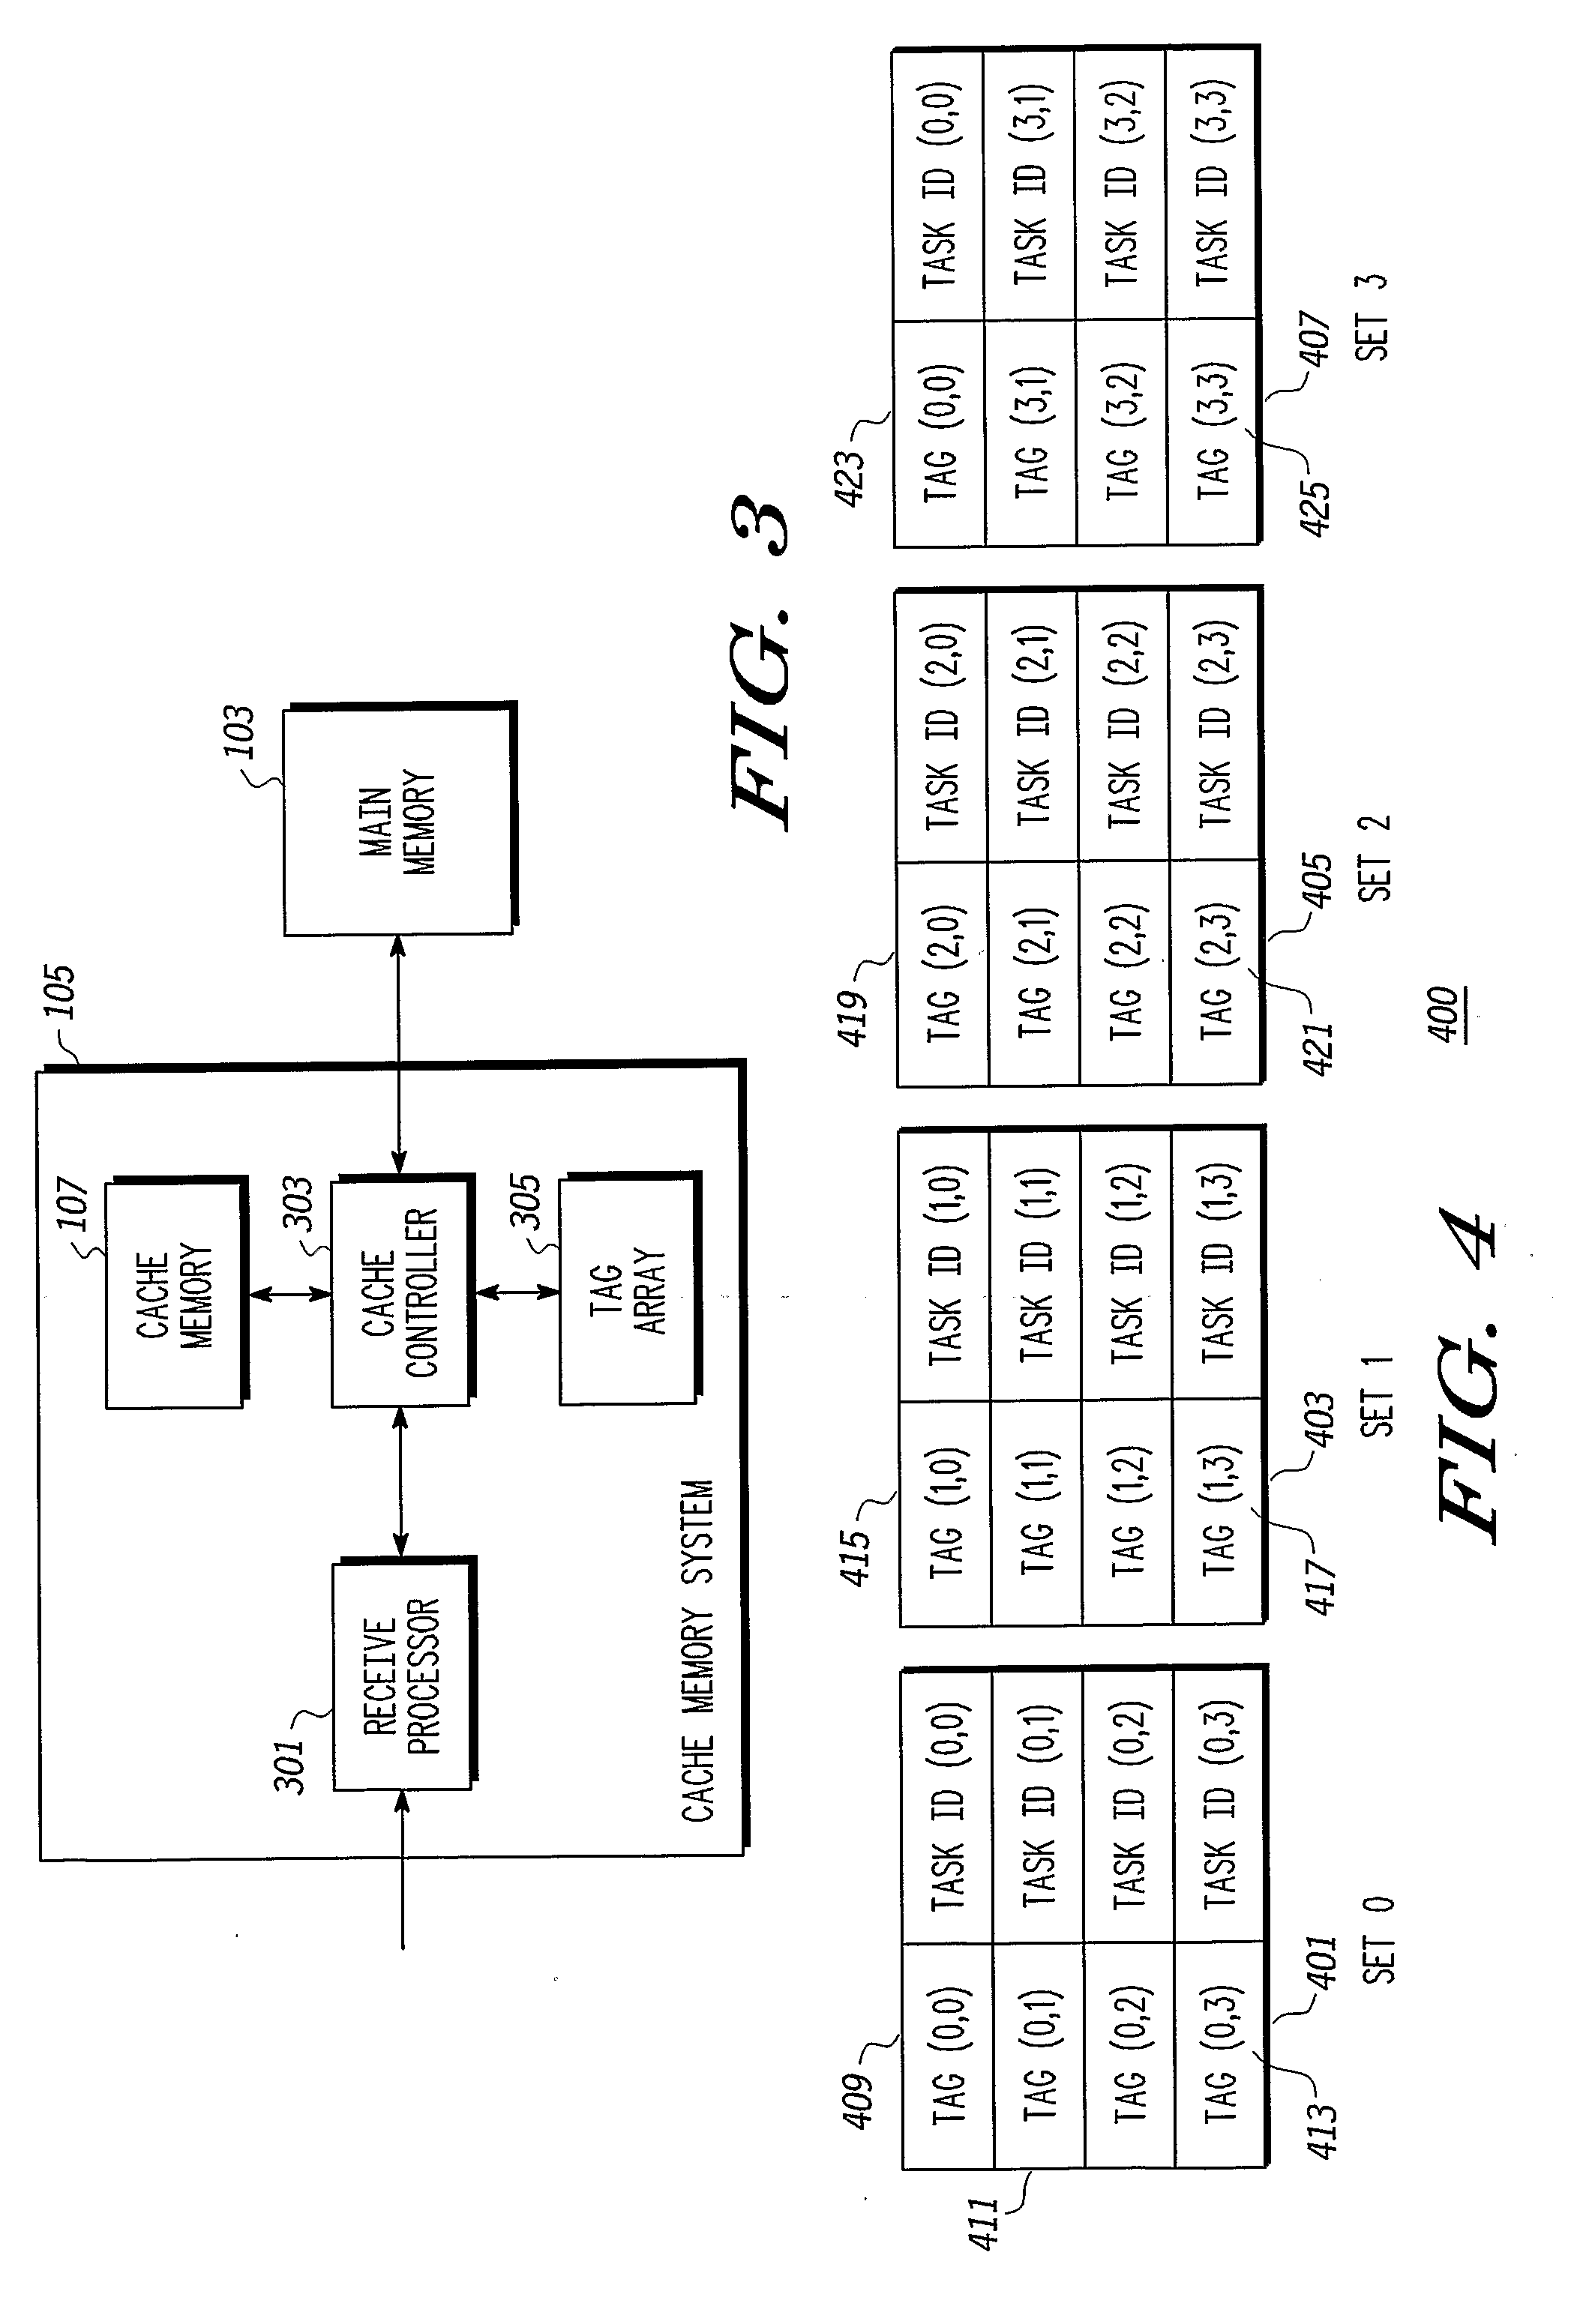 Memory Cache Control Arrangement and a Method of Performing a Coherency Operation Therefor